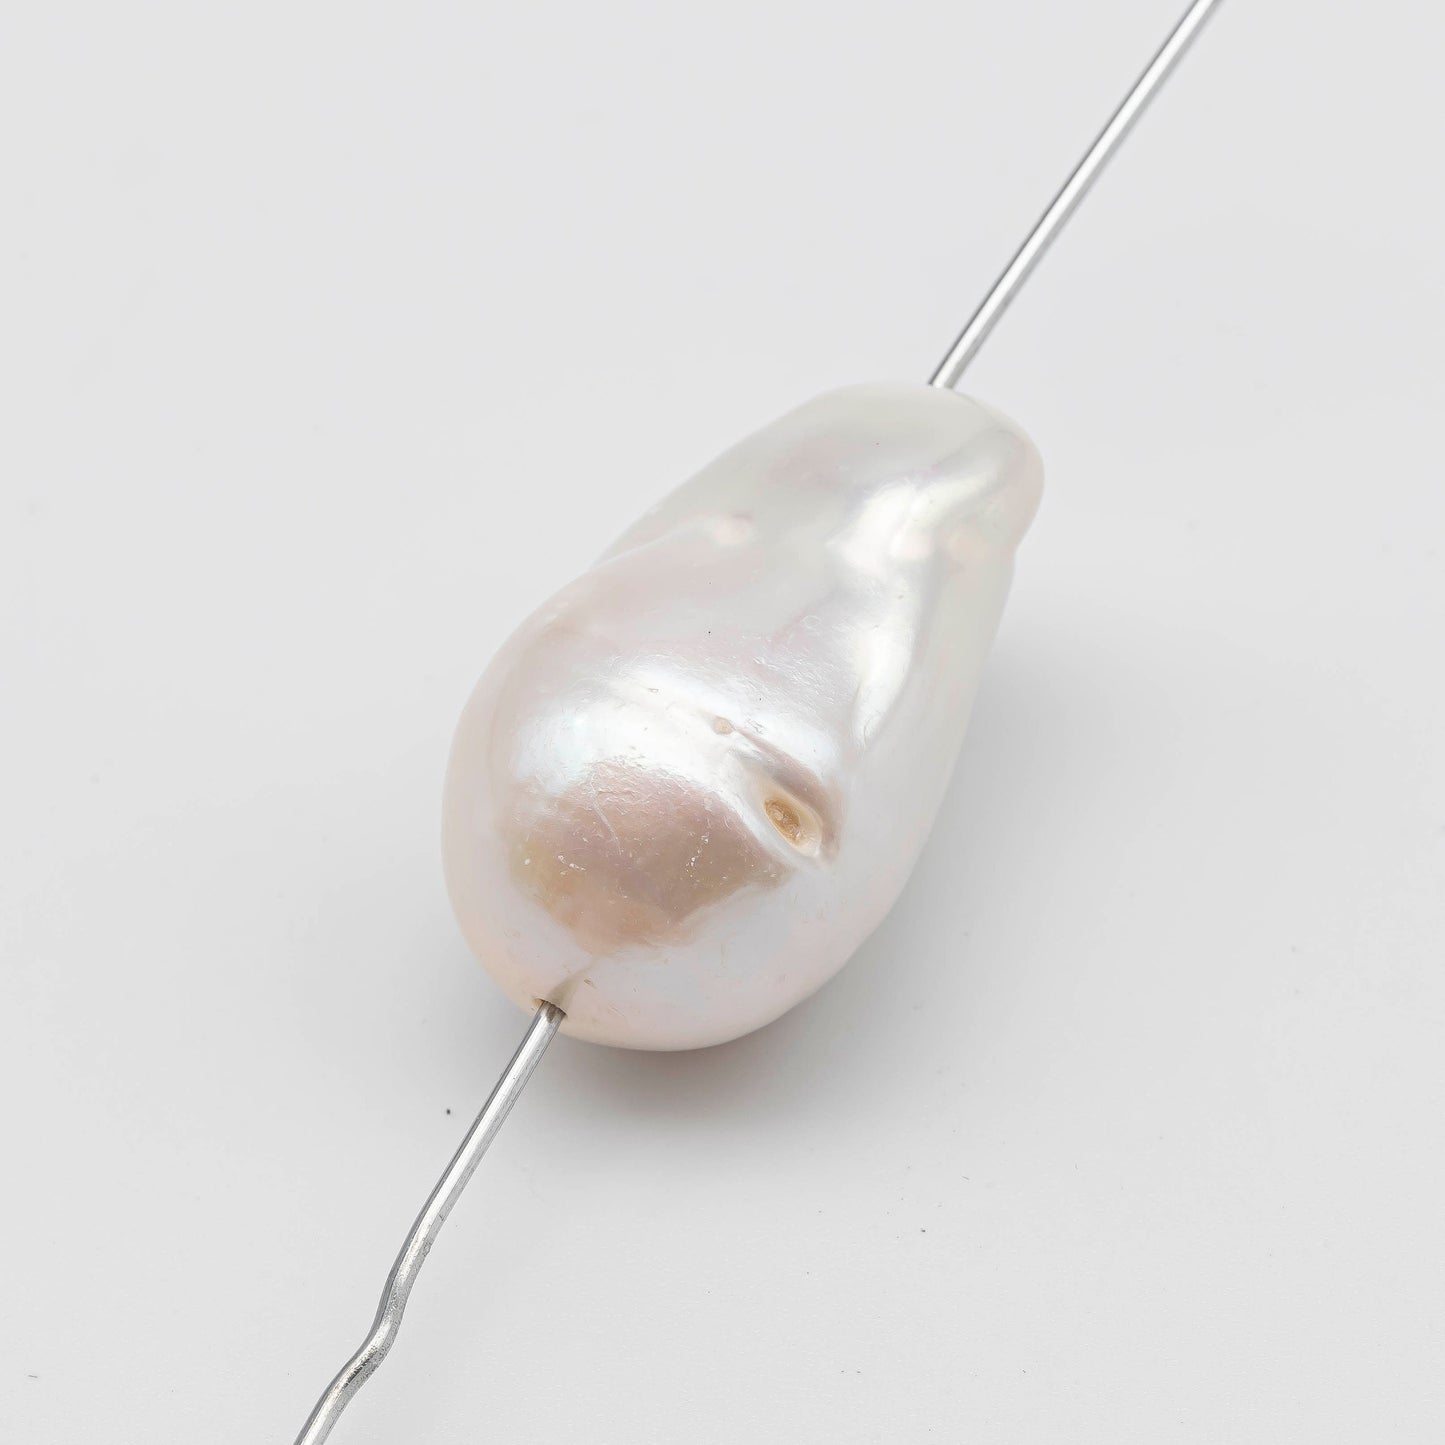 Large Size Baroque Pearl White Freshwater Pearl, From 14x23mm to 18x32mm Drop or Pear Shape, Full Strand or 1 Pc, SKU # 1186BA